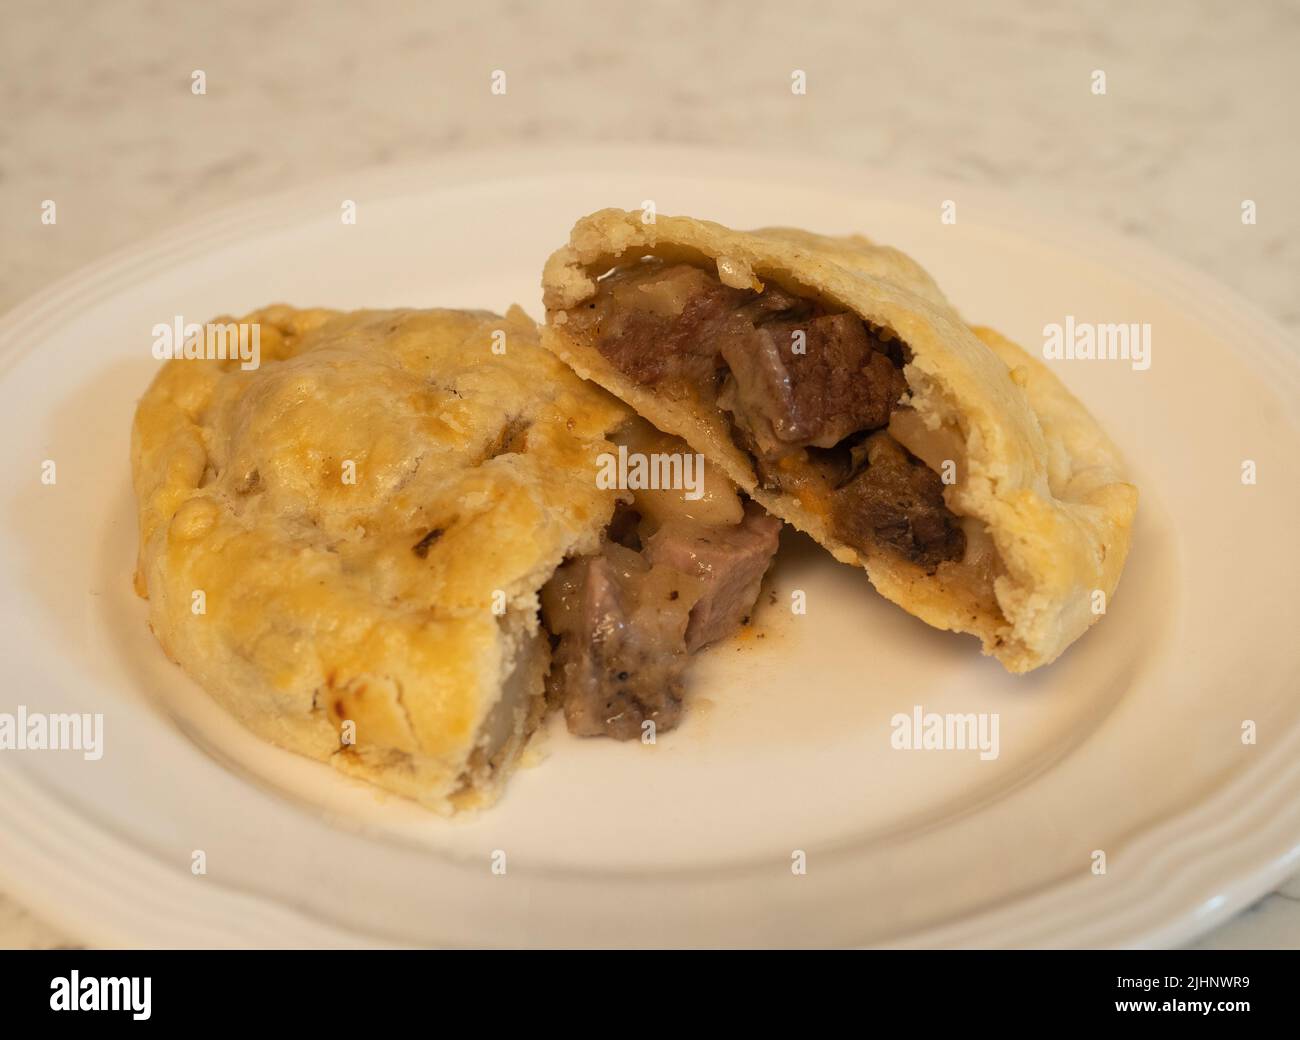 Pasty cut open with beef filling on a white plate. Stock Photo